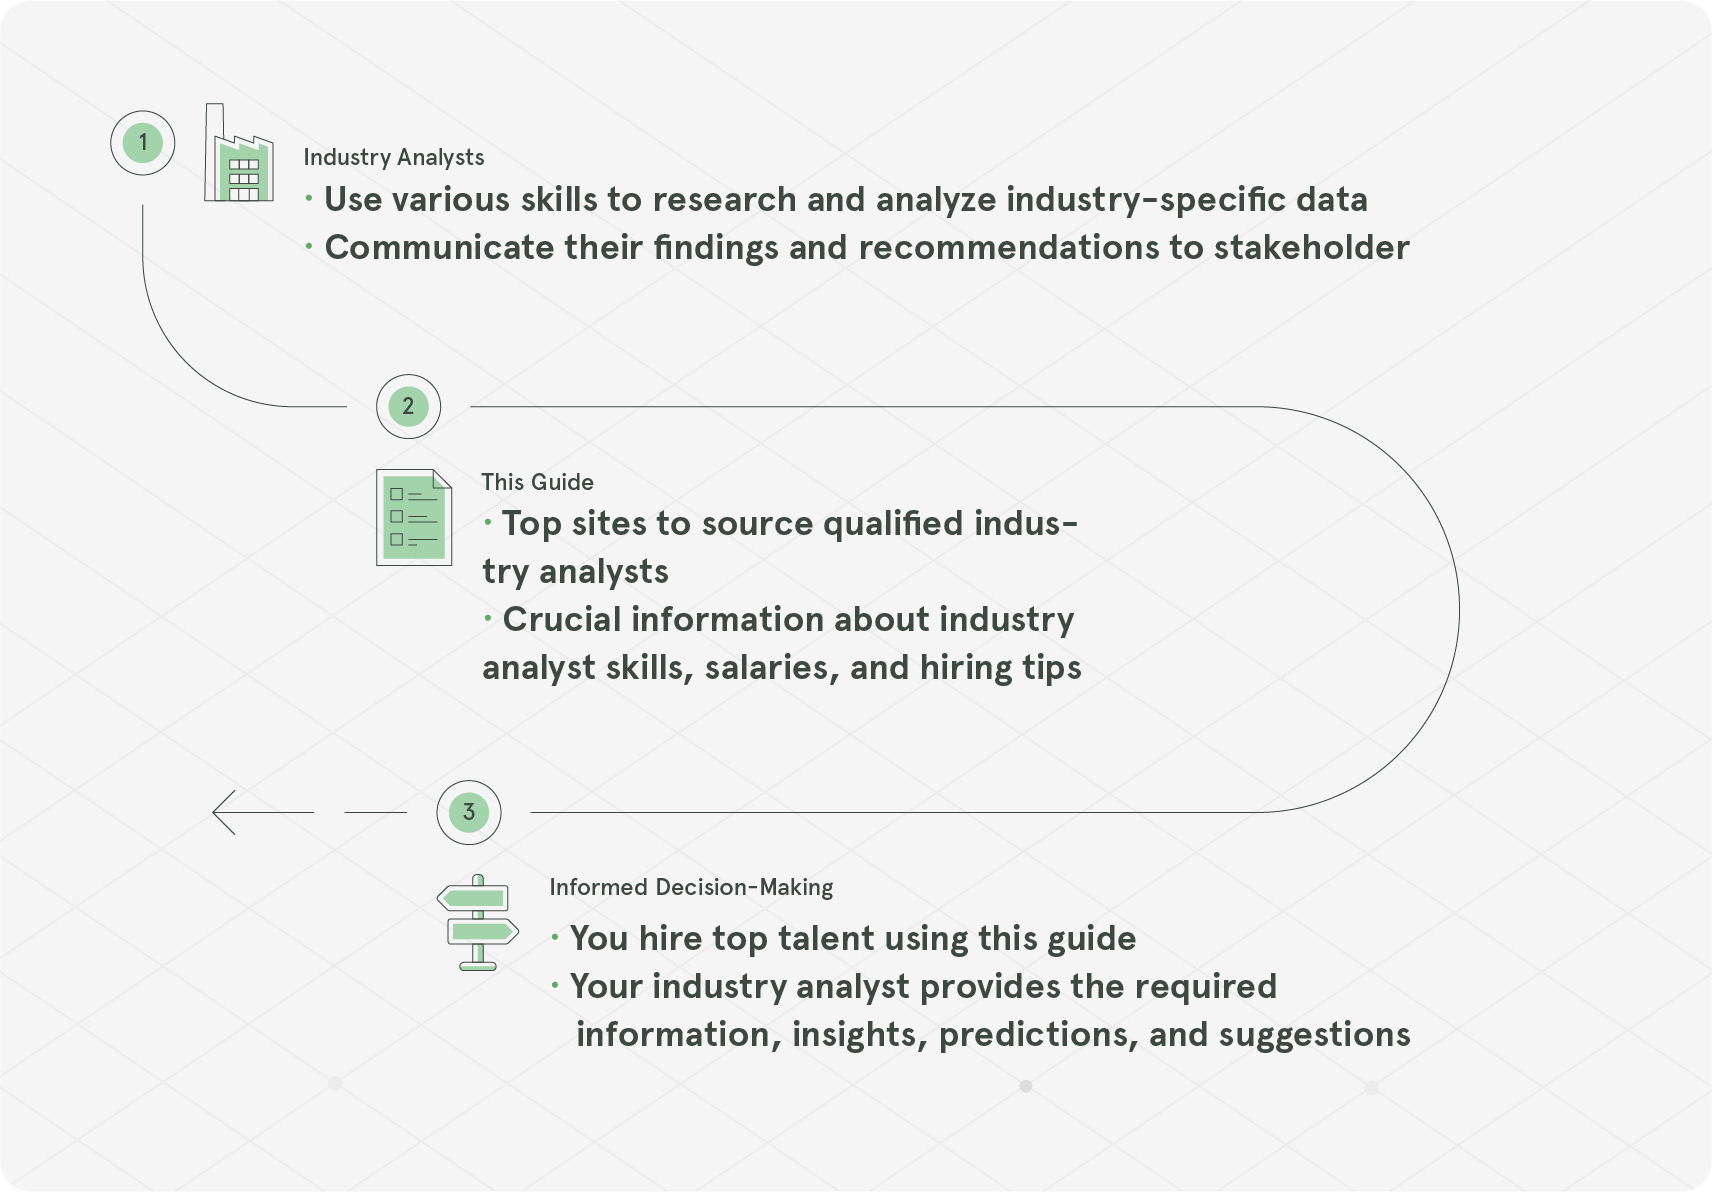 Hire Industry Analysts - Guide